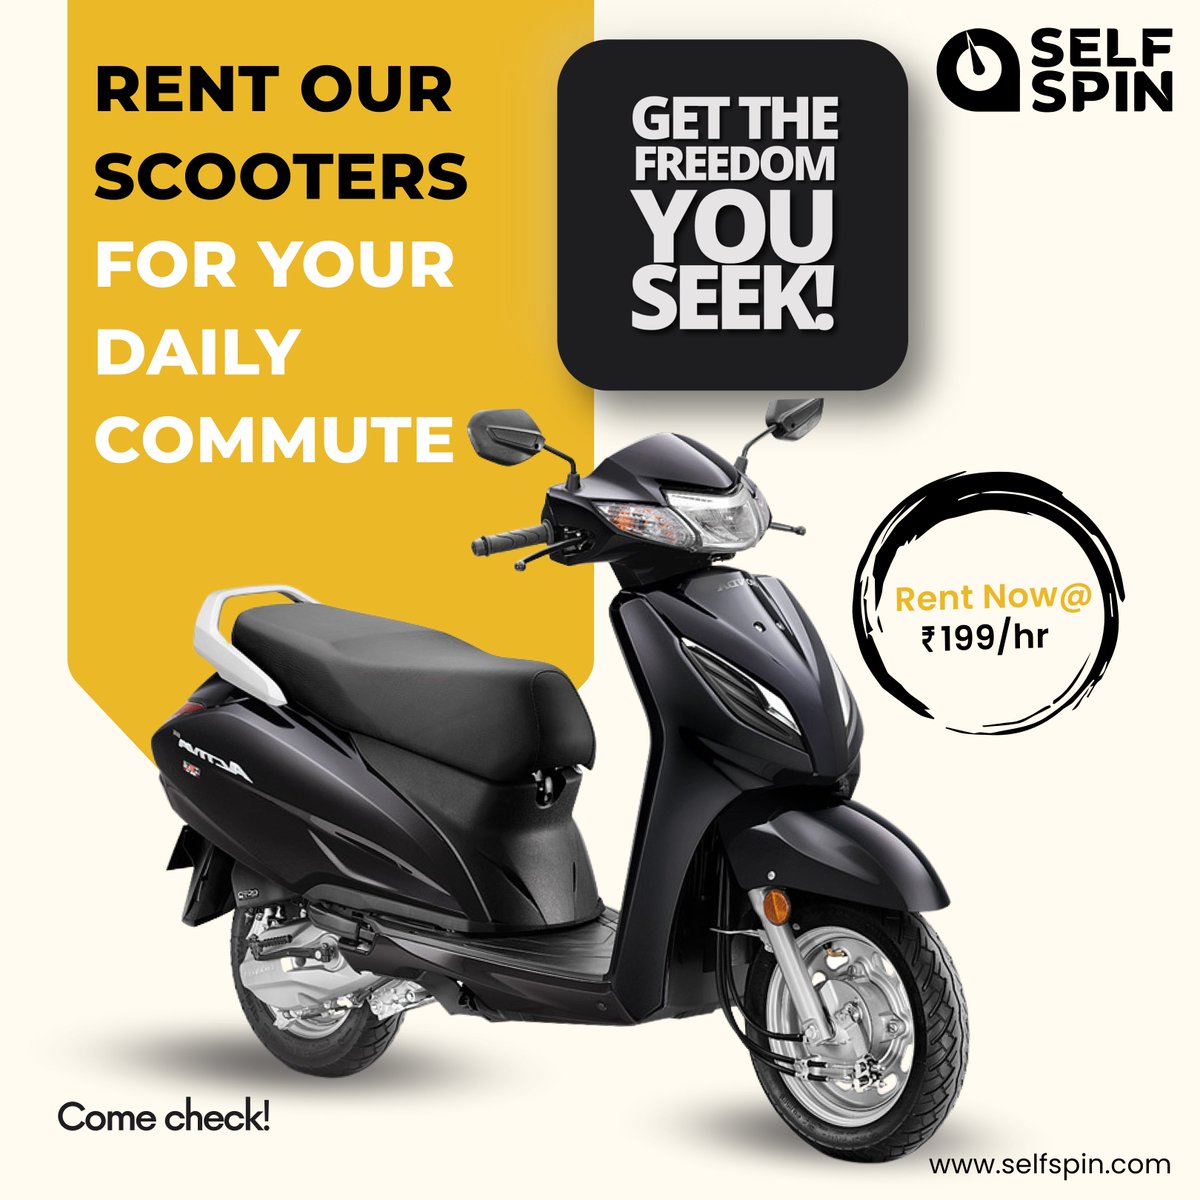 Elevate Your Daily Commute: Rent Our Scooters for Effortless Travel!🚲🔒

#SelfSpin #Pune #Bengaluru #RentalServices #BikeRental #ConvenientCommute #DailyCommute #ScooterRental #FreedomOnWheels #SelfDrive #AnytimeAnywhere